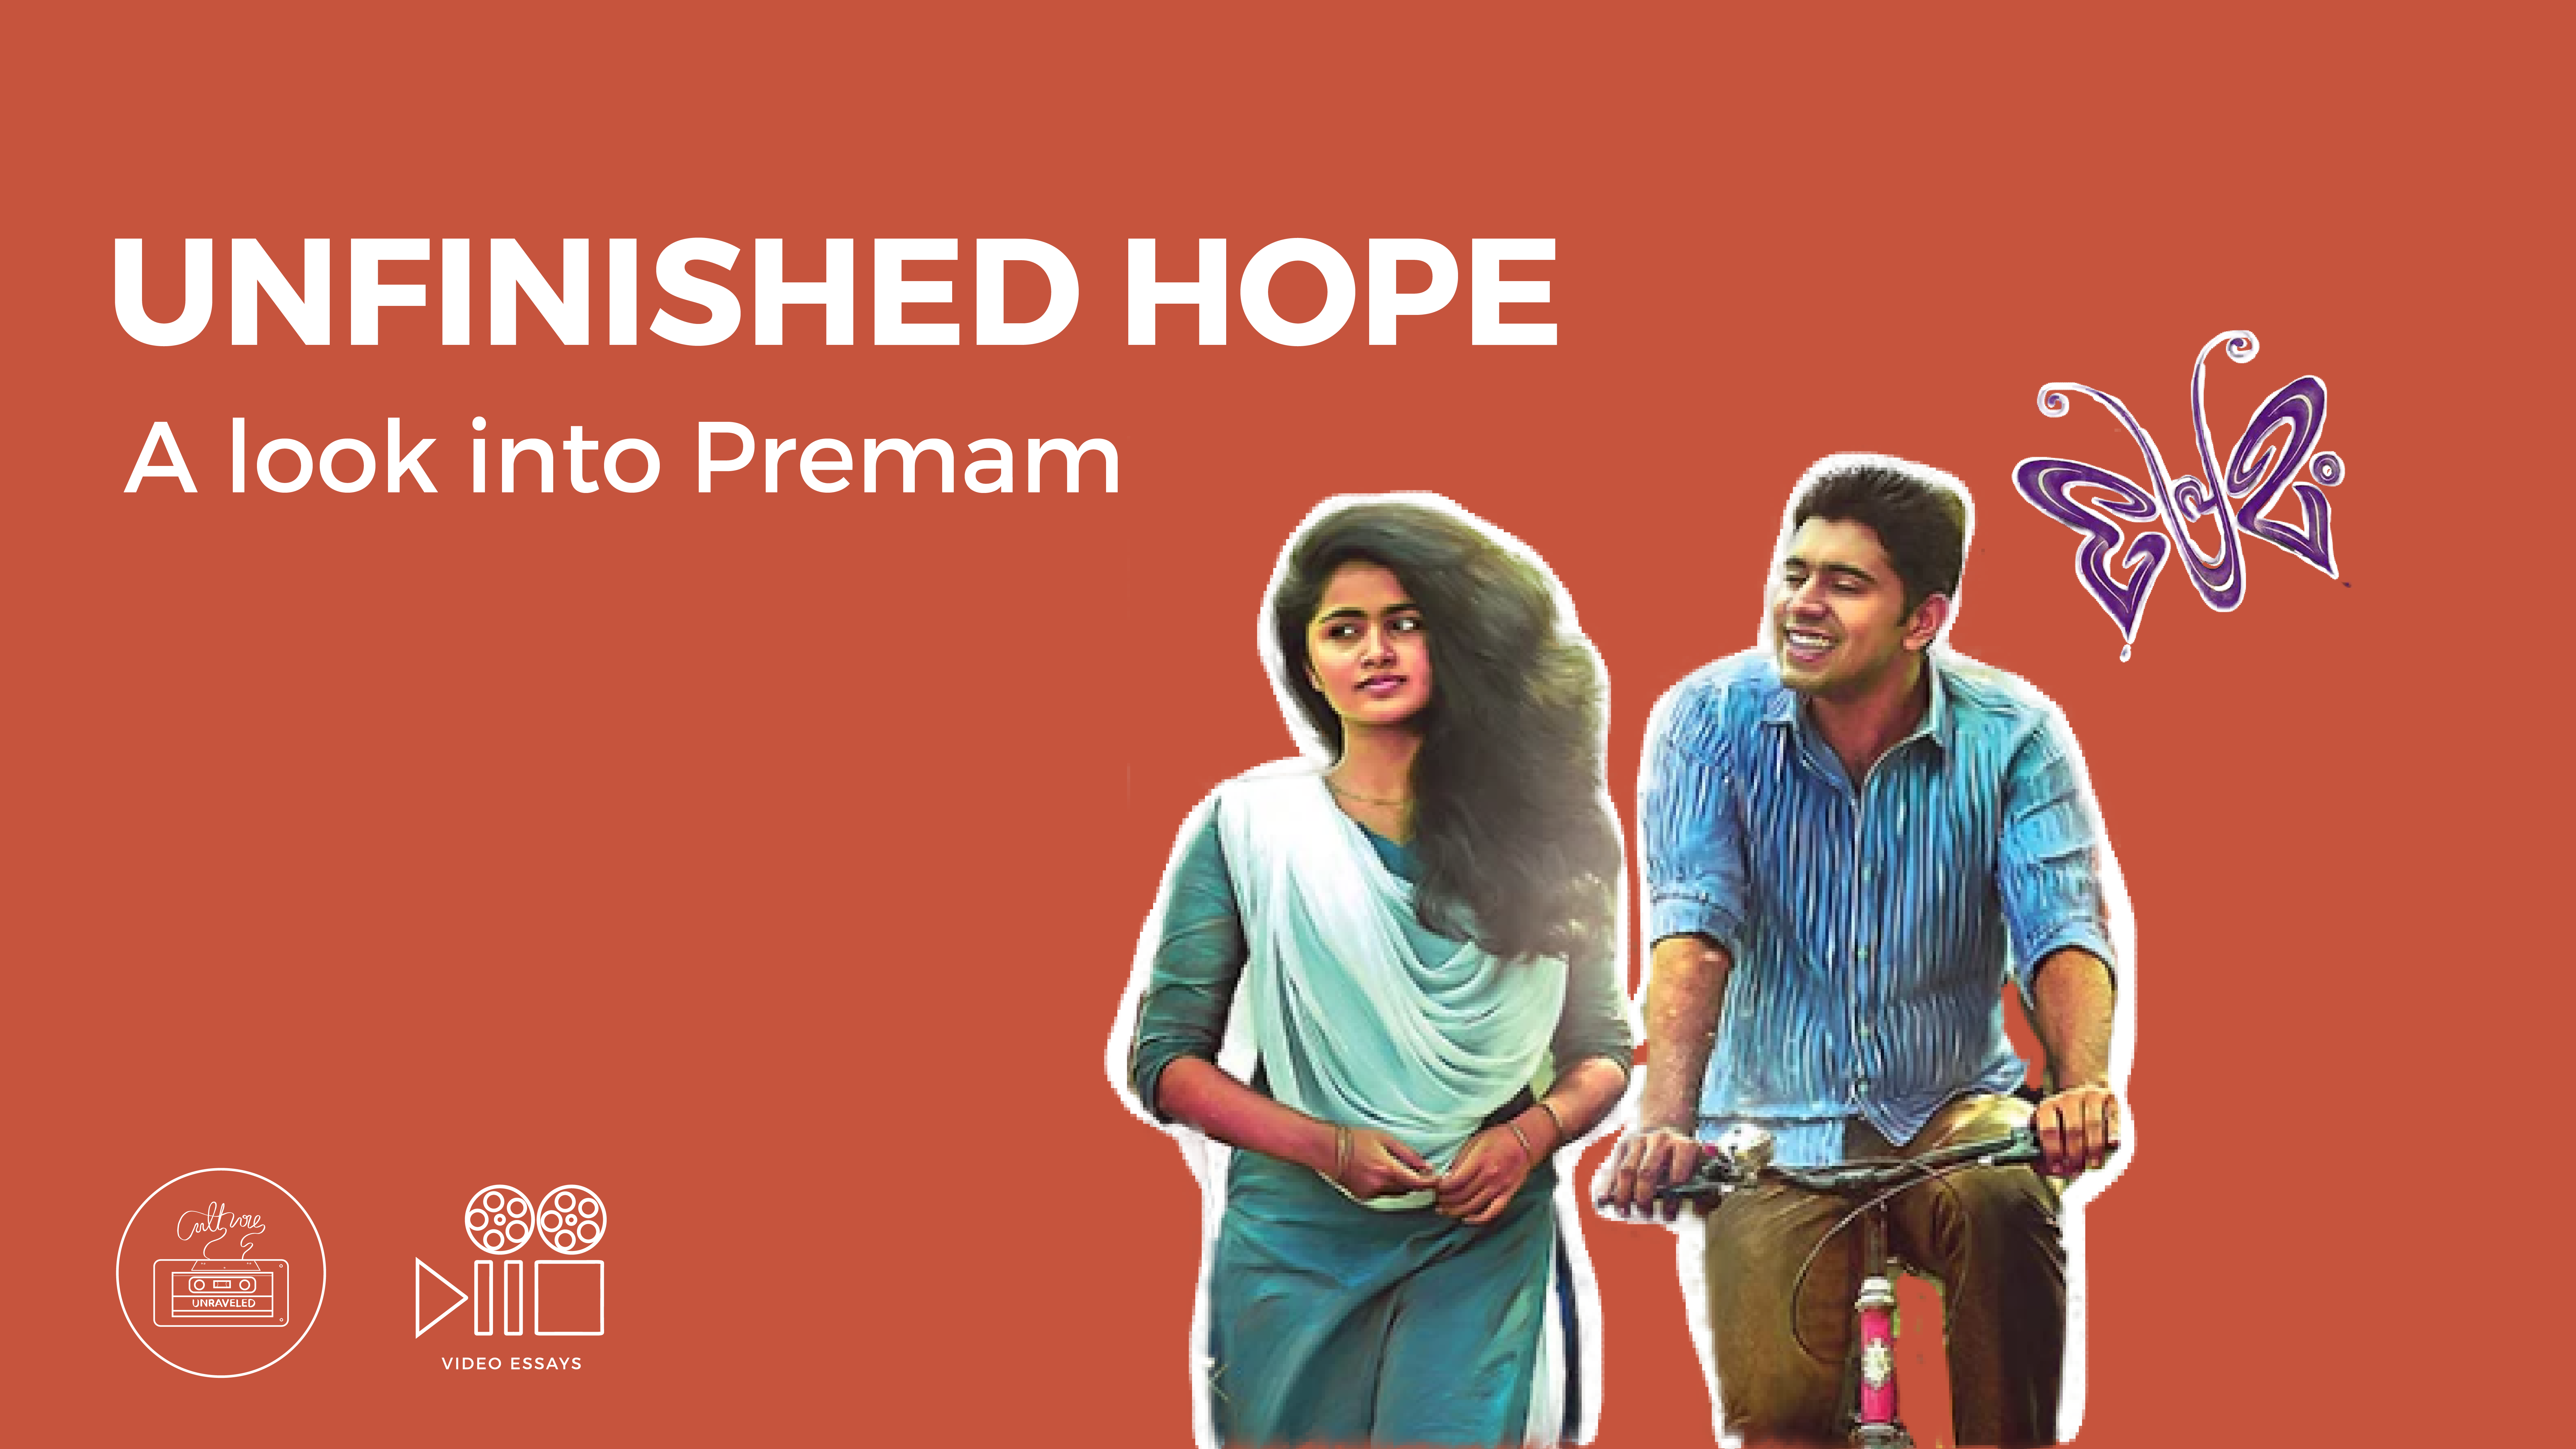 Unfinished Hope. A look into Premam